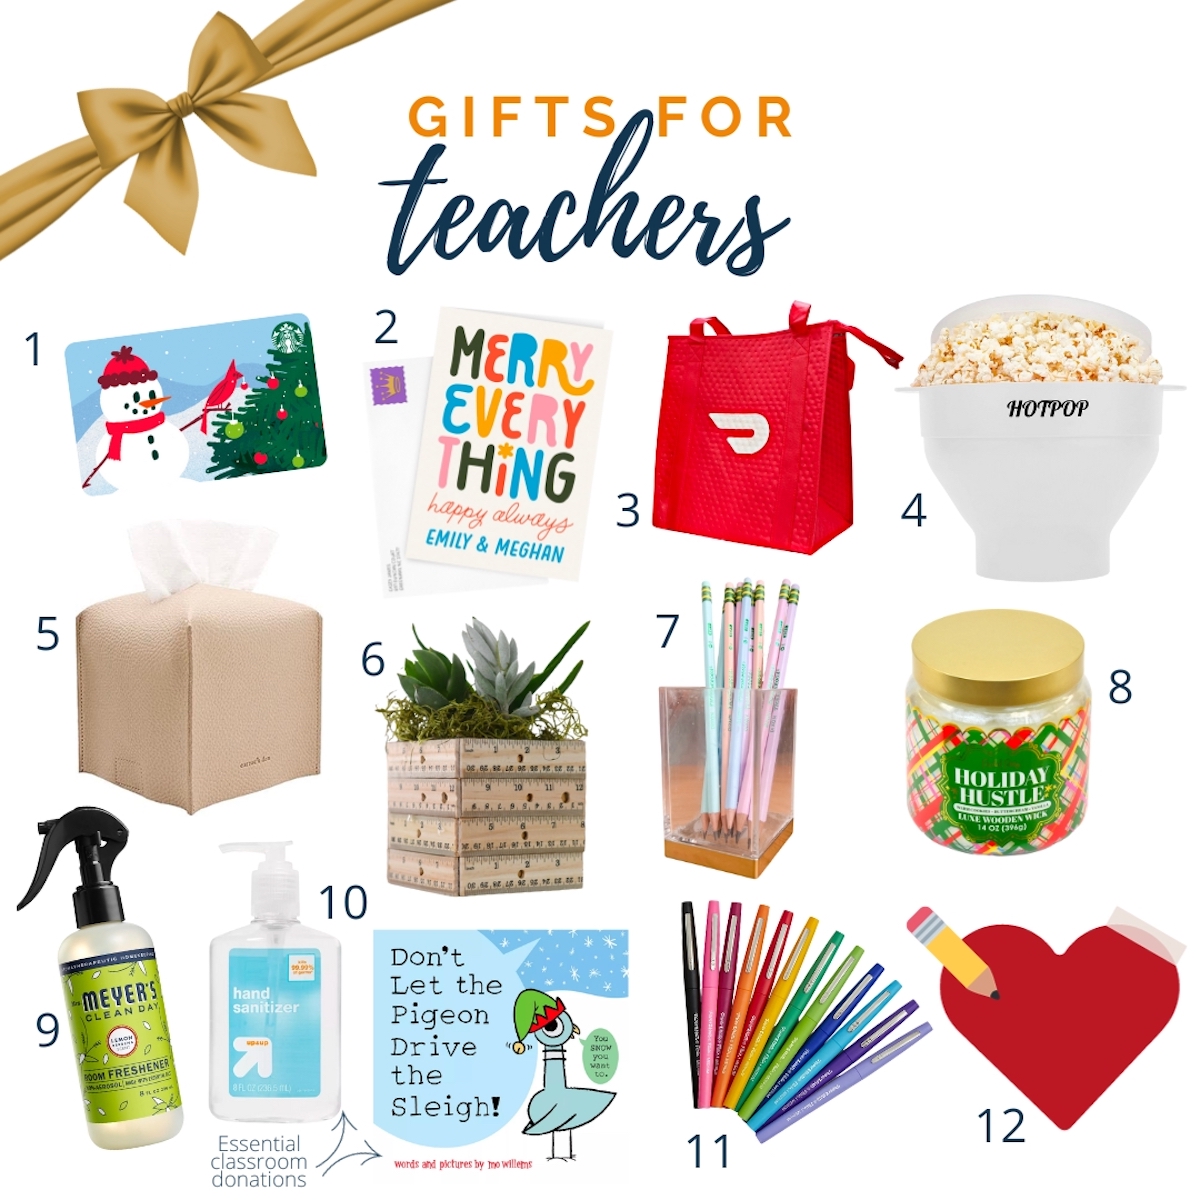 10 Useful gifts for teachers that they will love + Free Printable (2018)